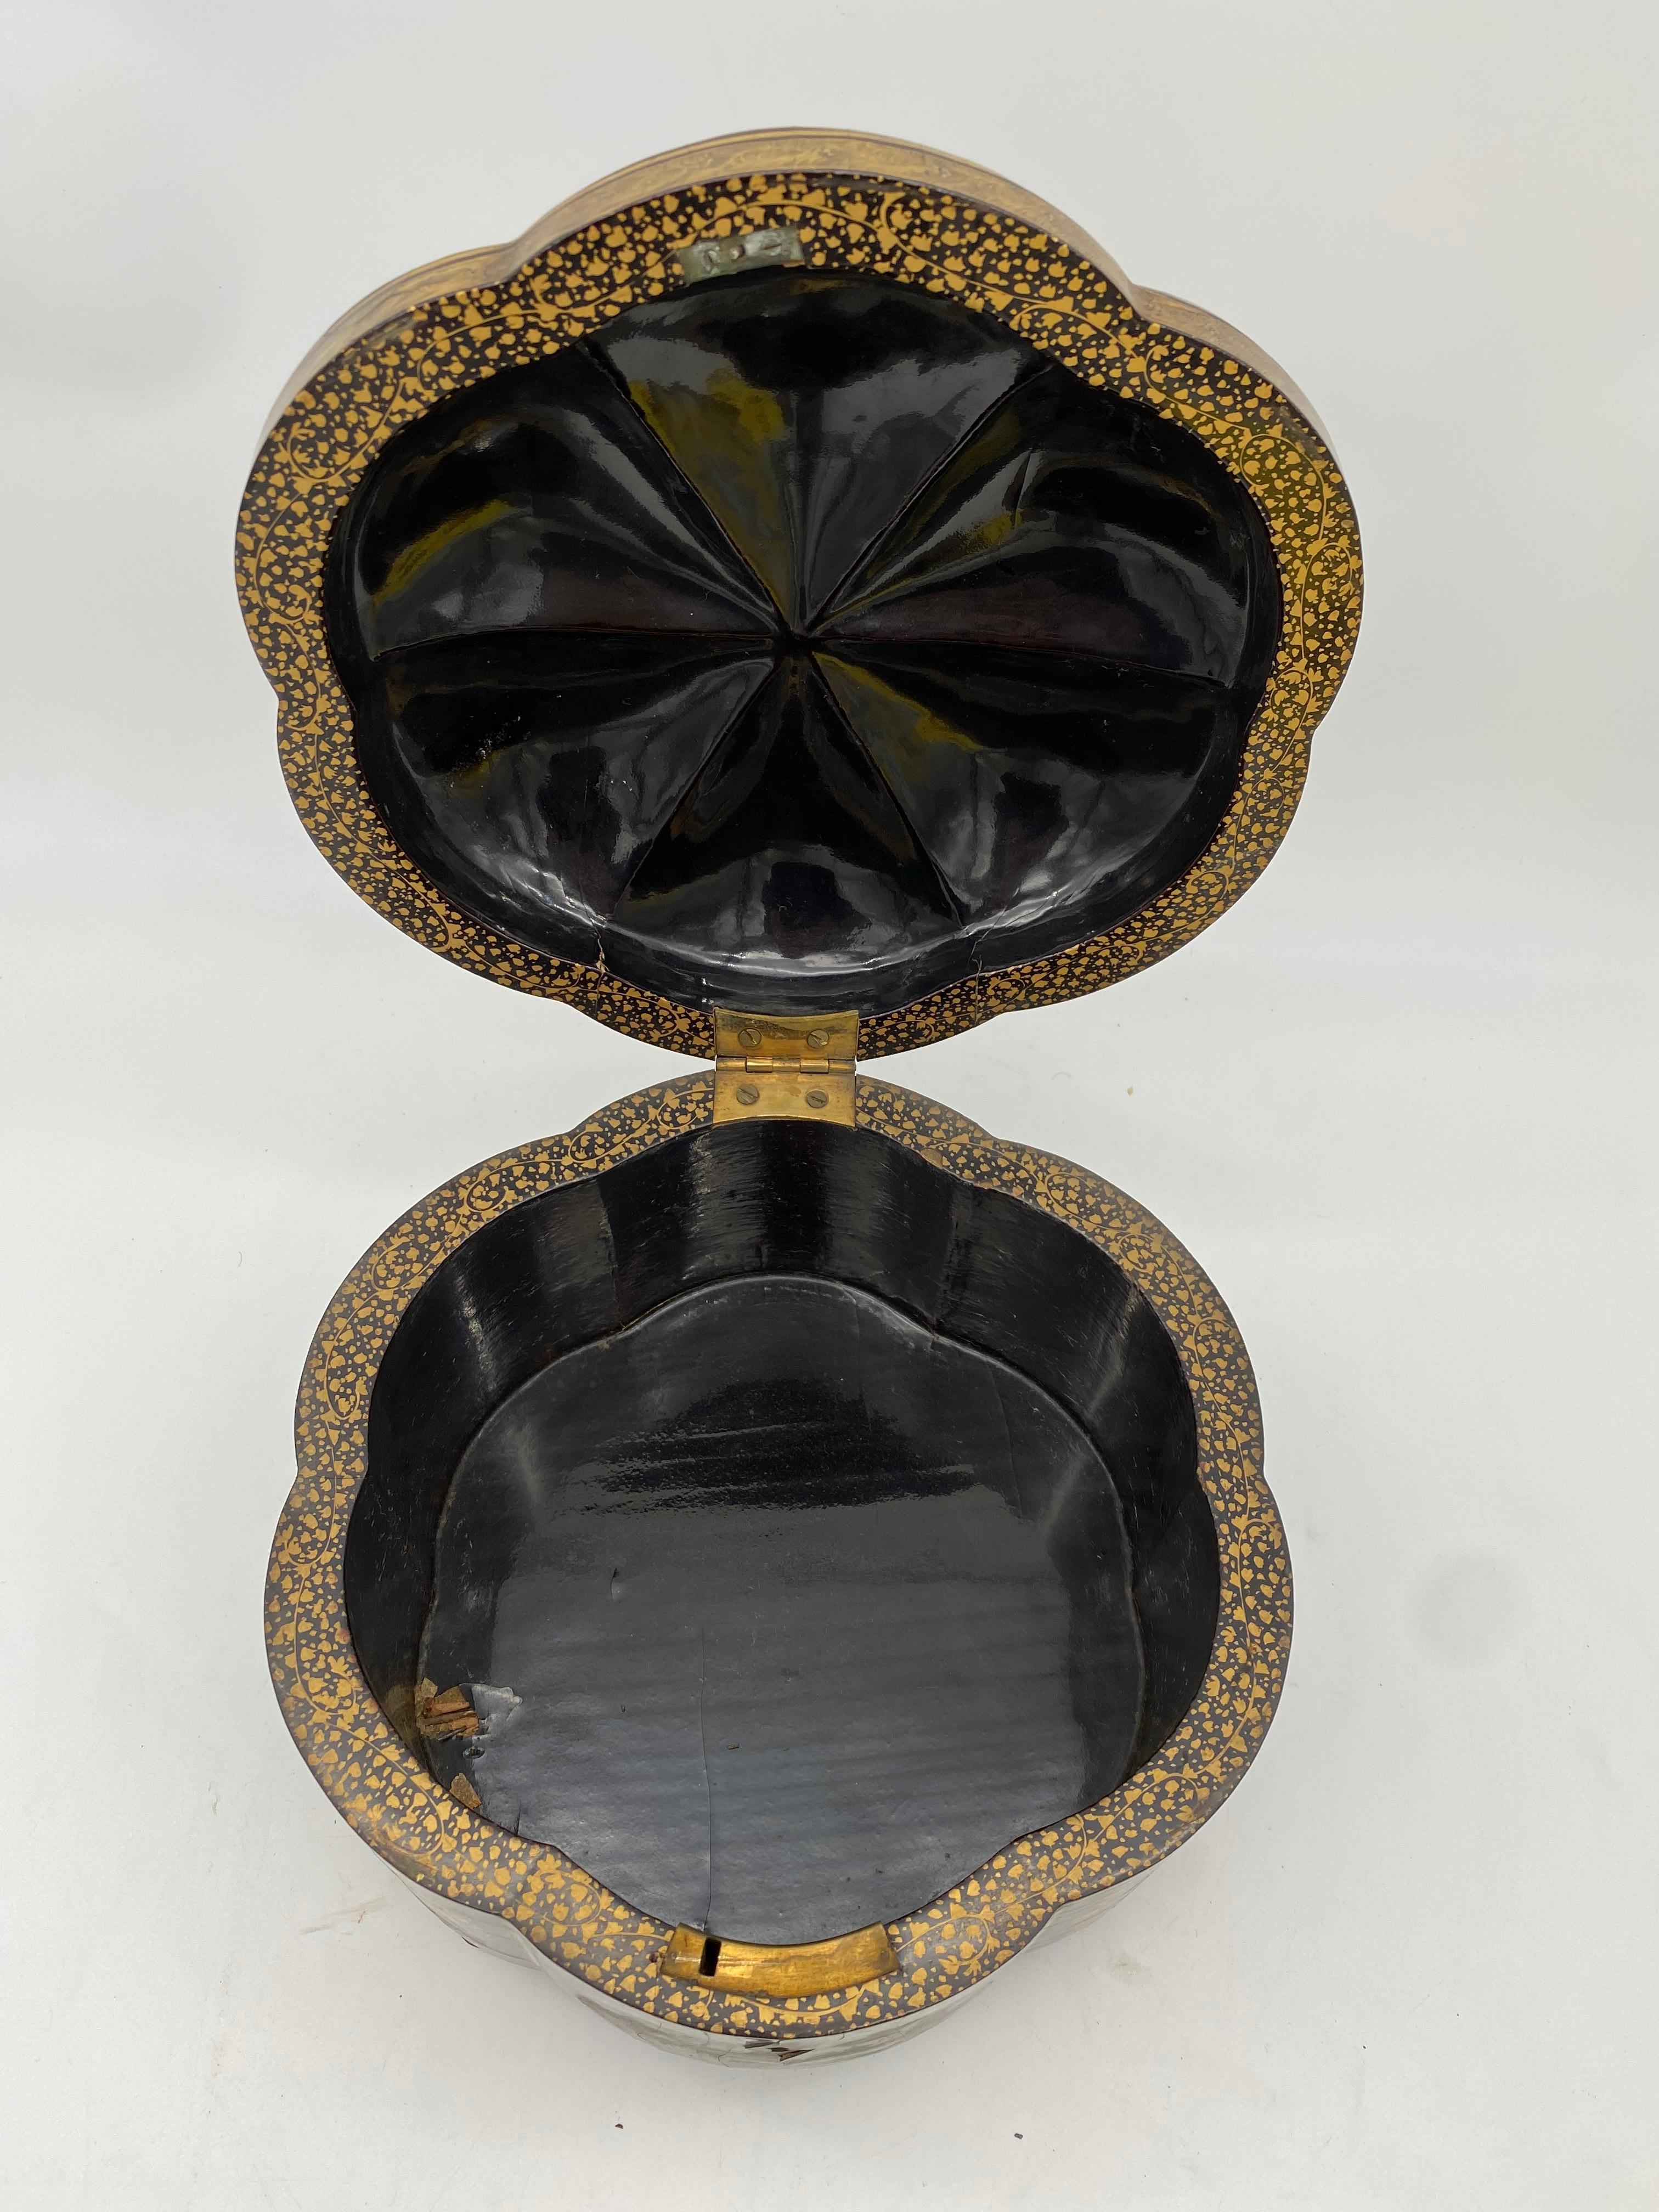 19th Century a Unique Gilt Chinese Lacquer Tea Caddy For Sale 8